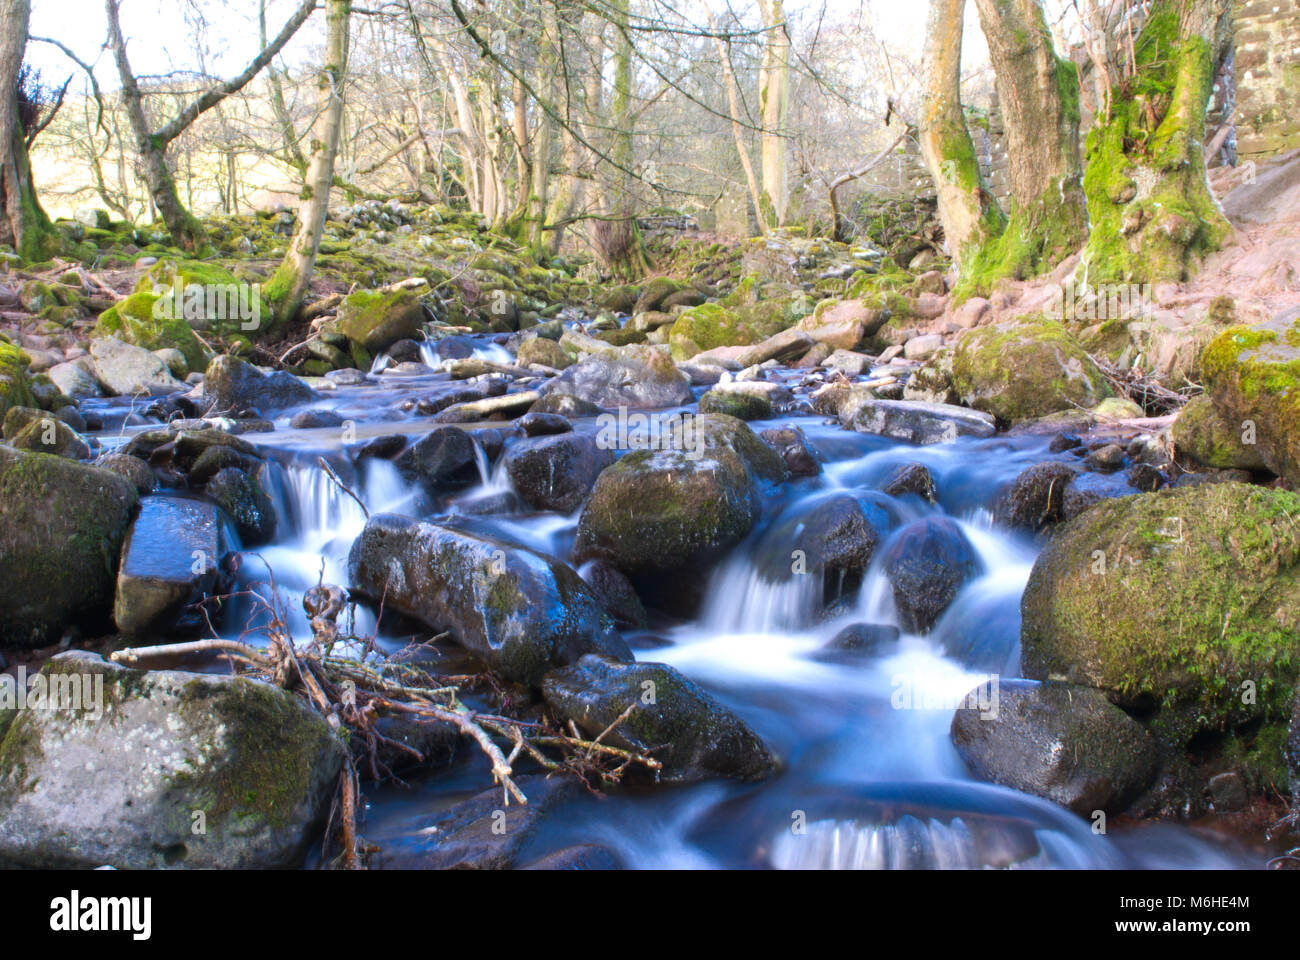 Welsh Water Falls, The Breacon Beacons Stock Photo